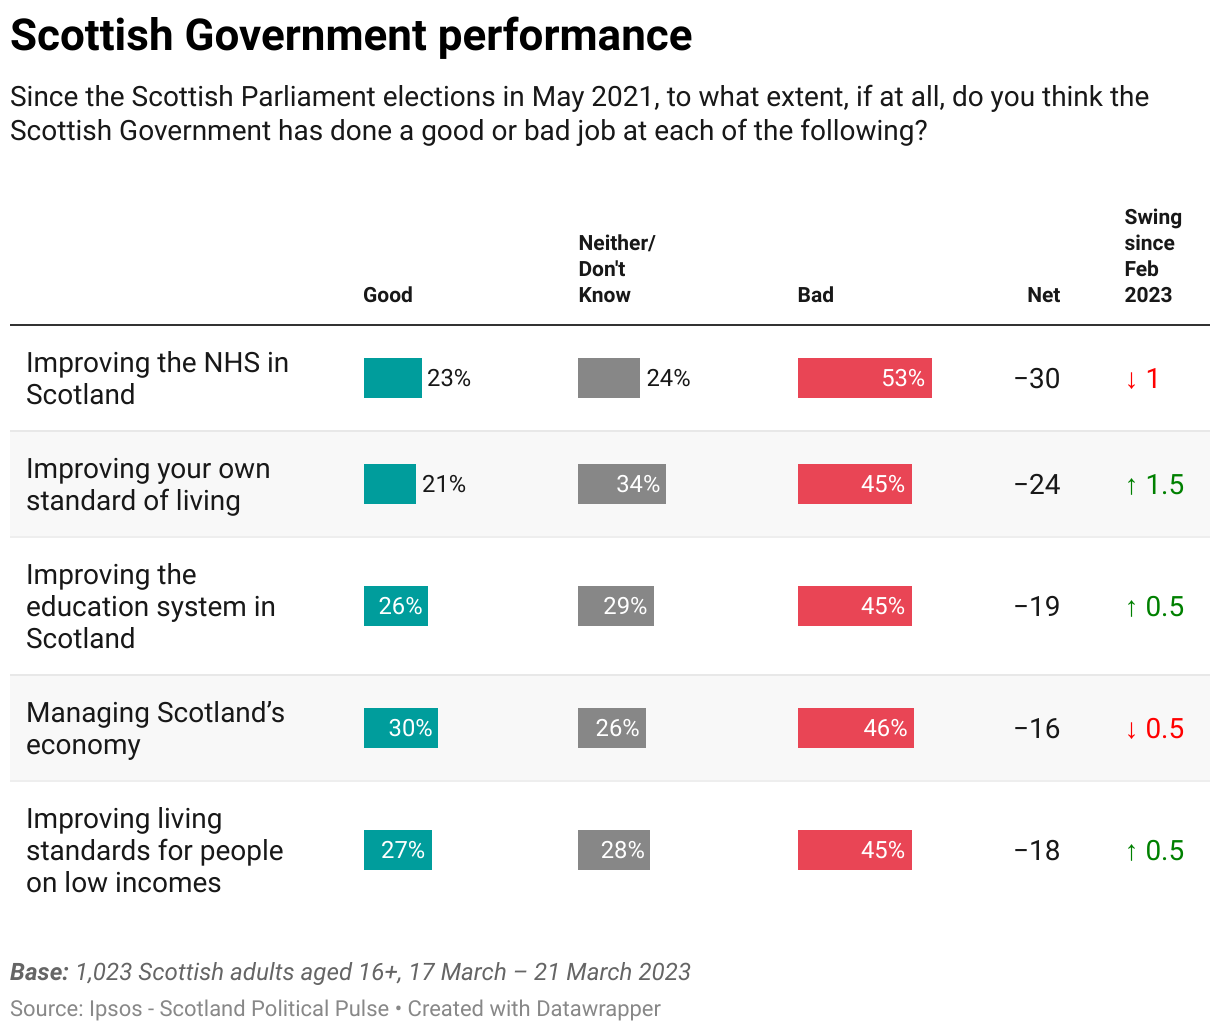 Since the Scottish Parliament elections in May 2021, to what extent, if at all, do you think the Scottish Government has done a good or bad job at each of the following? Good % - Neither/Don't Know% Bad% Net Swing since Feb 2023
Improving the NHS in Scotland 23% 24% 53% -30 Down 1
Improving your own standard of living 21% 34% 45% -24 Up 1.5
Improving the education system in Scotland 26% 29% 45% -19 Up 0.5
Managing Scotland’s economy 30% 26% 46% -16 Down 0.5
Improving living standards for people on low incomes 27% 28% 45% -18 Up 0.5
Base: 1,023 Scottish adults aged 16+, 17 March – 21 March 2023